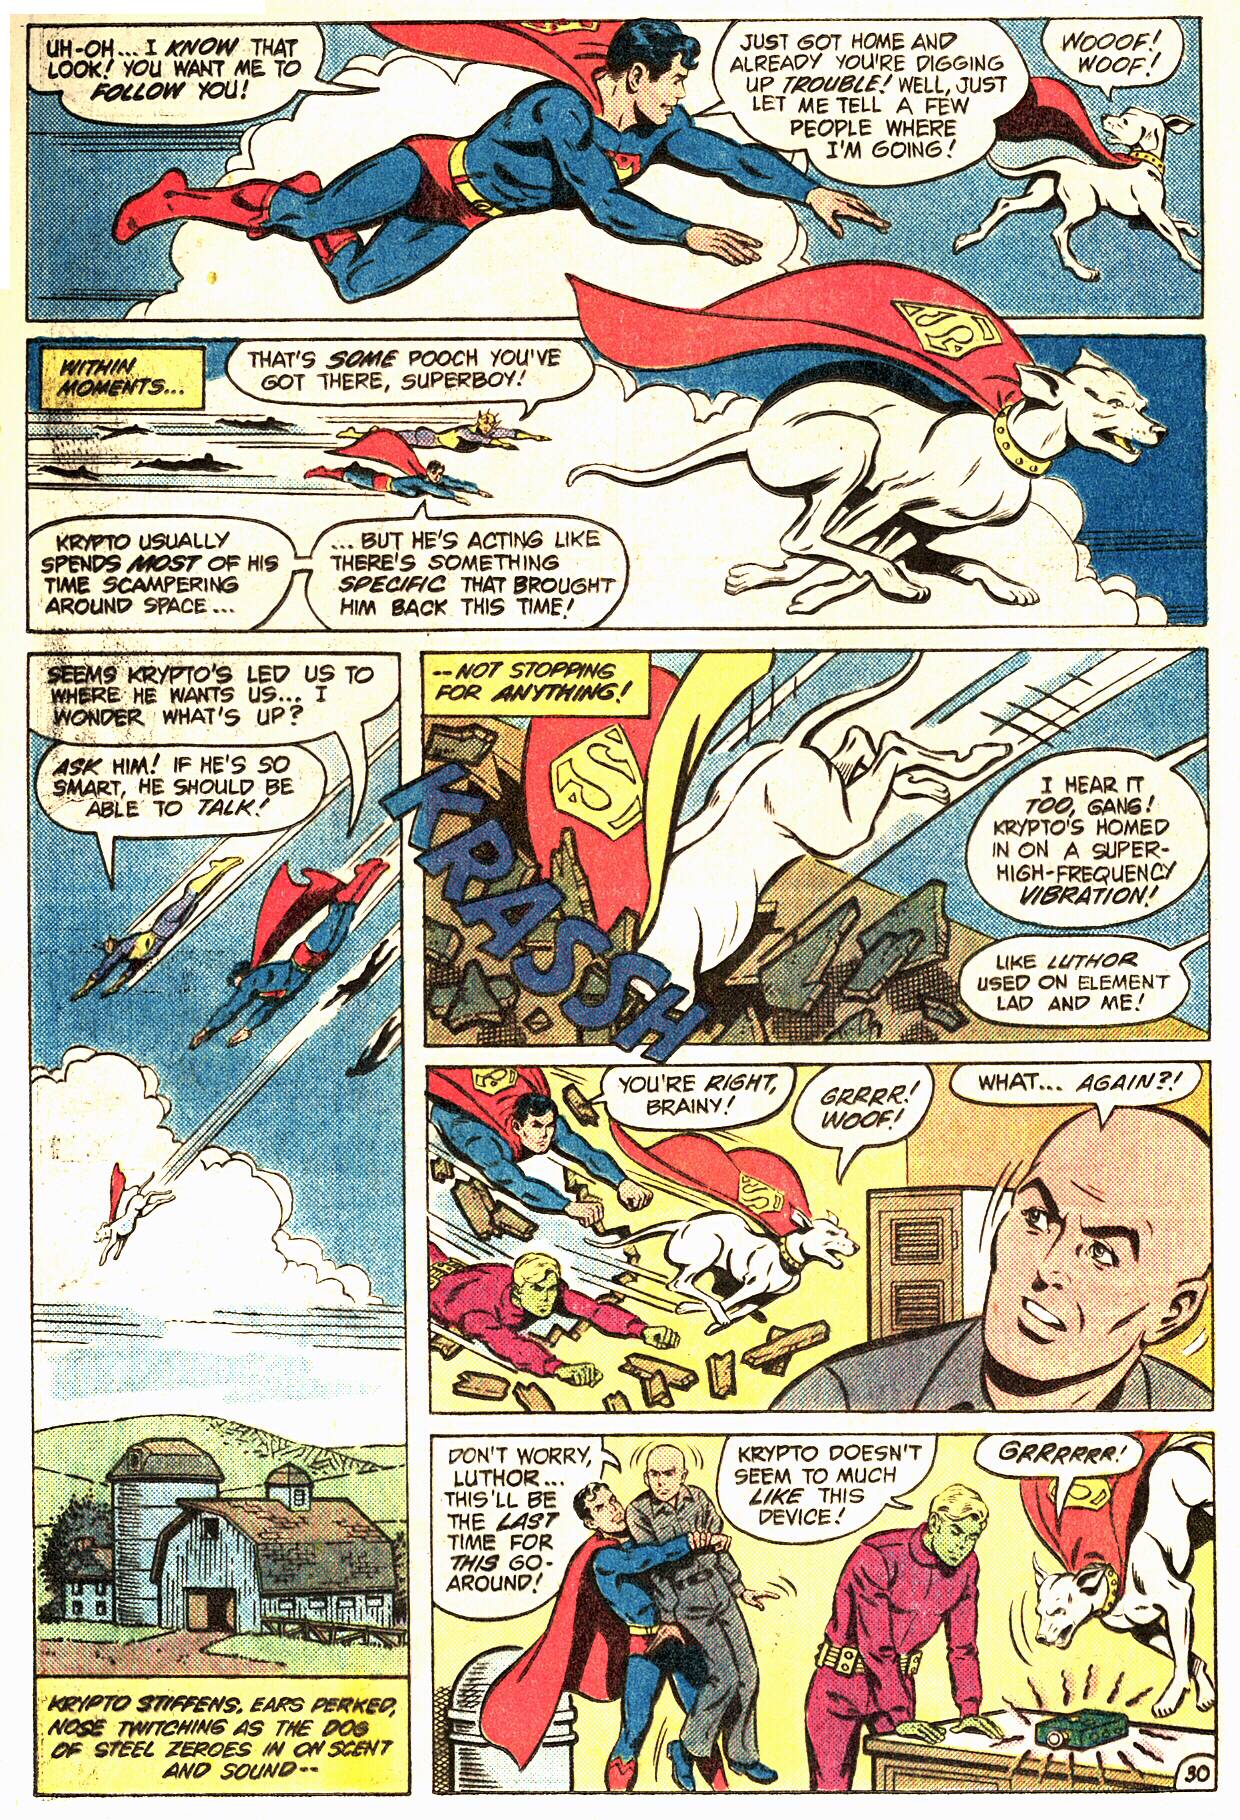 The New Adventures of Superboy 50 Page 30